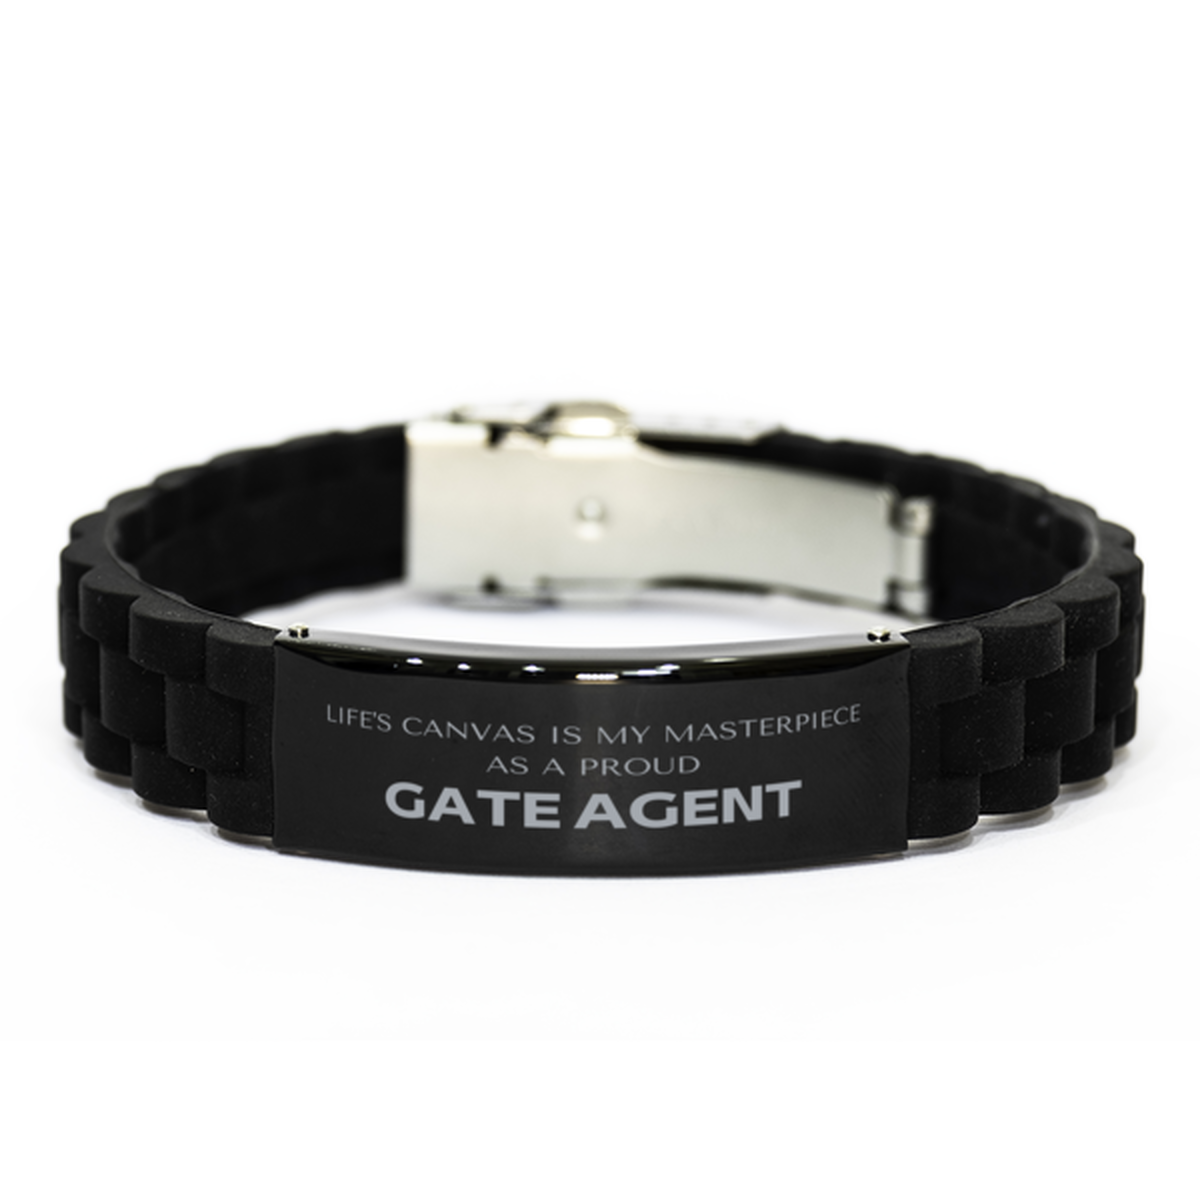 Proud Gate Agent Gifts, Life's canvas is my masterpiece, Epic Birthday Christmas Unique Black Glidelock Clasp Bracelet For Gate Agent, Coworkers, Men, Women, Friends